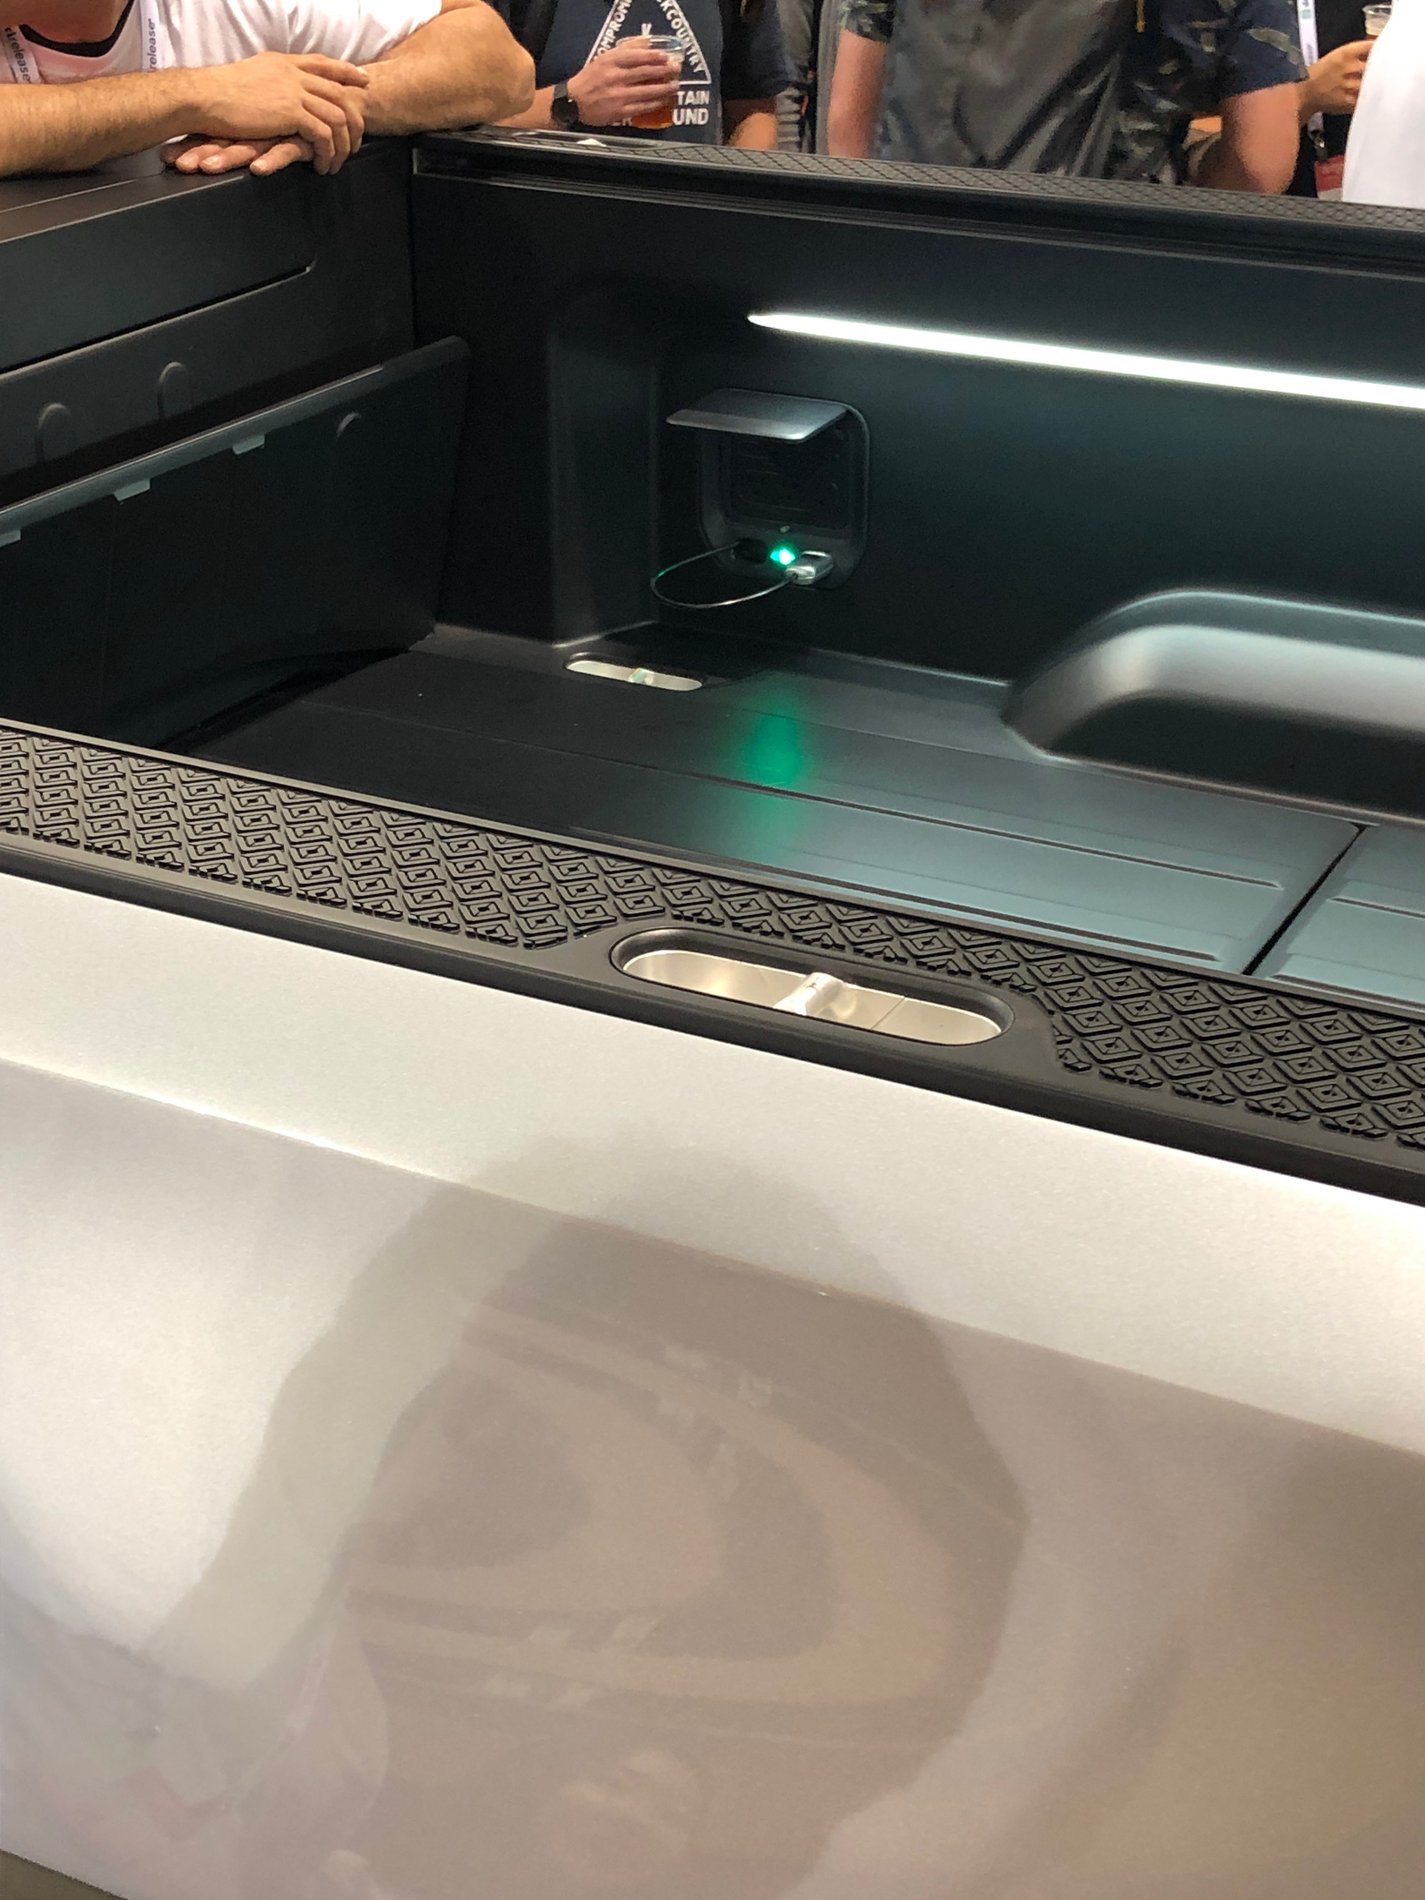 Rivian R1T R1S Any new tidbits from Outdoor Retailer? upload_2019-6-20_22-20-14